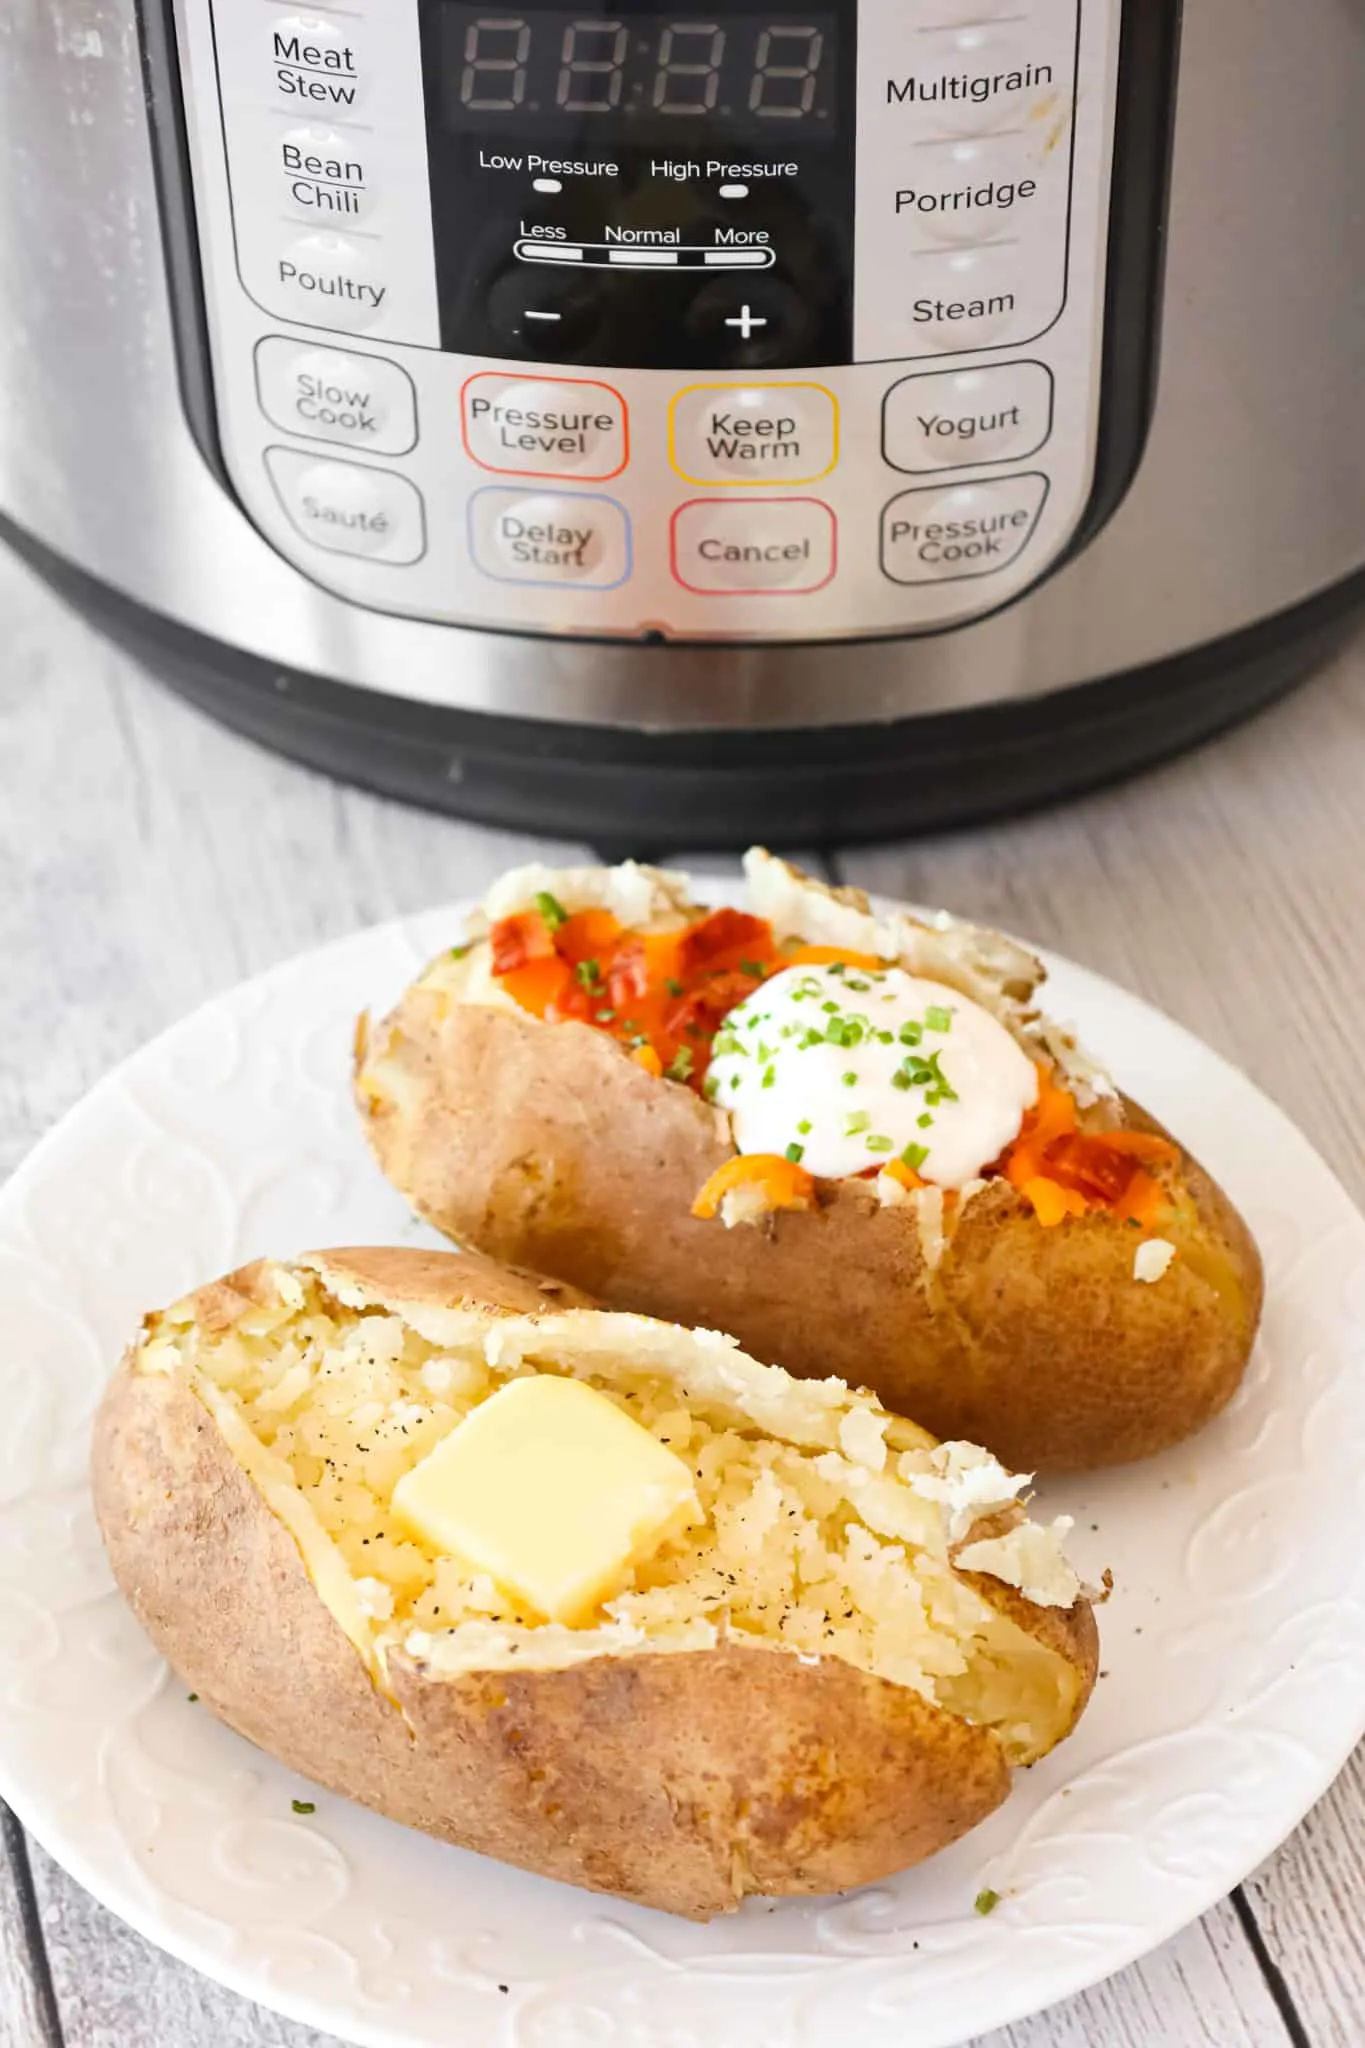 Instant Pot Baked Potatoes are a simple and delicious side dish recipe that can be topped with a variety of garnishes including butter, chives, sour cream, shredded cheese and crumbled bacon.